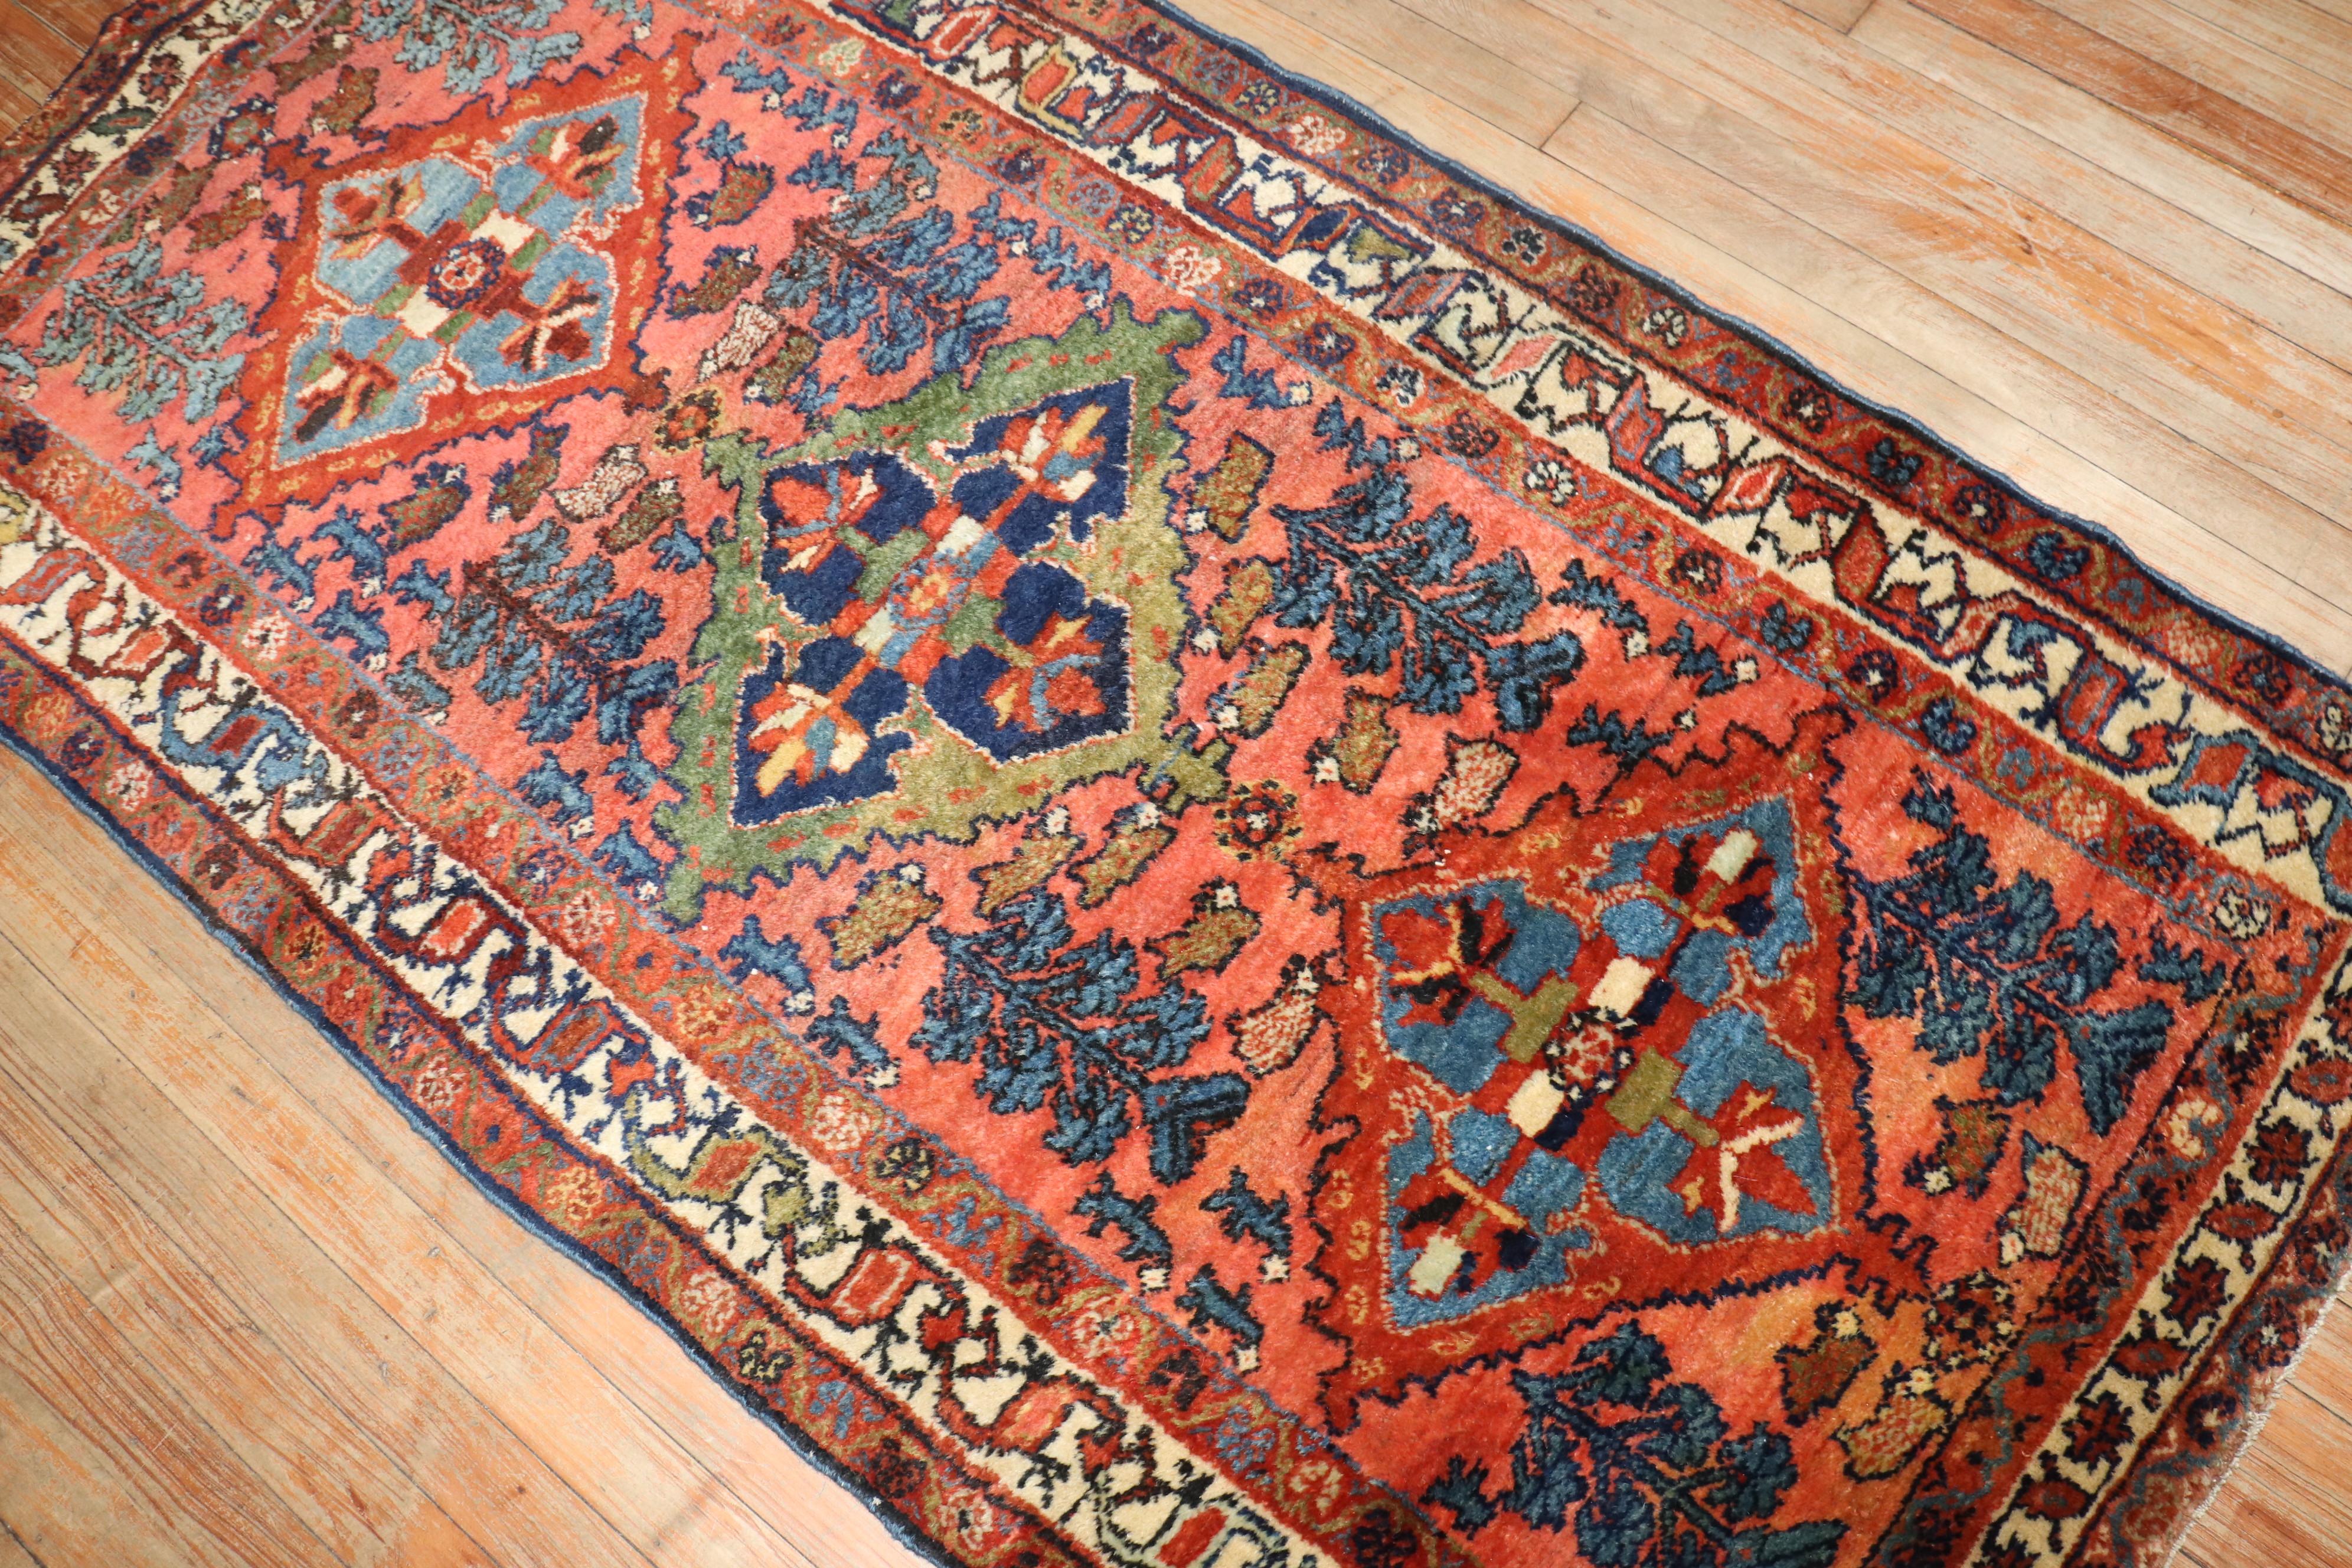 One of a kind Persian Hamedan  rug from the 20th century .

Measures: 3'1” x 6'2”.